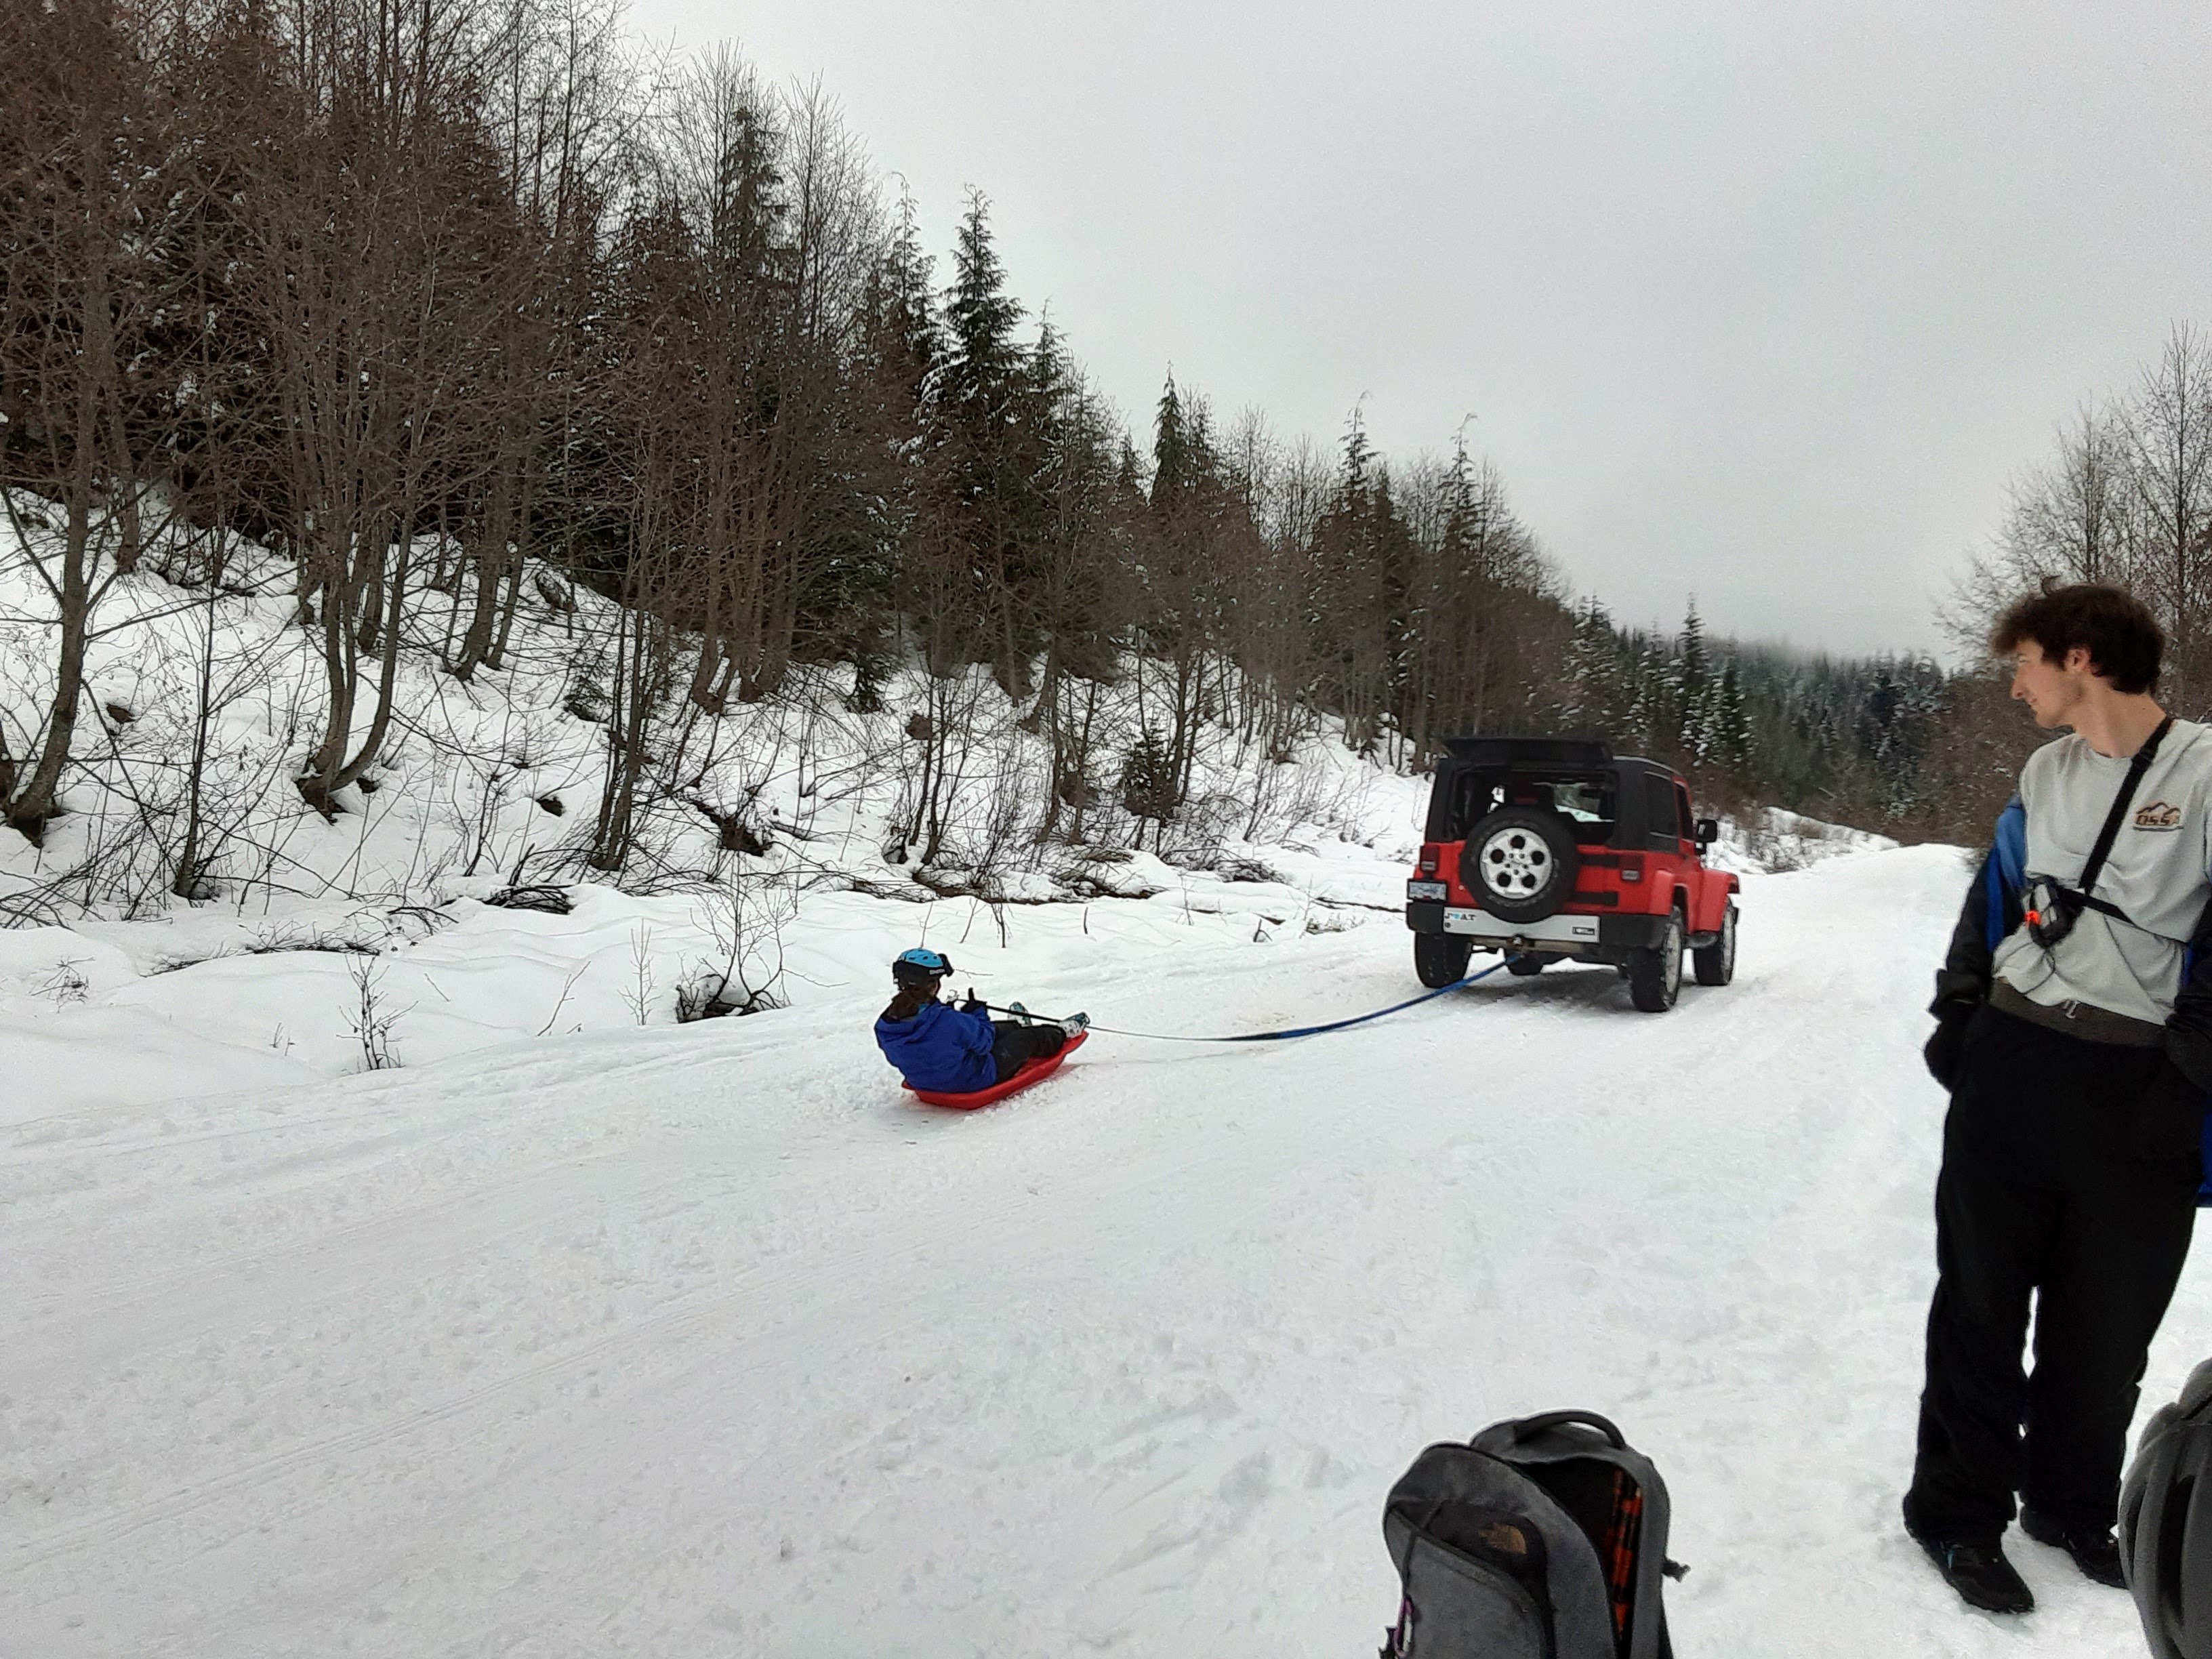 One of the highlights of my trip - sledding in an actual sled after skiing :D Photo by Thomas